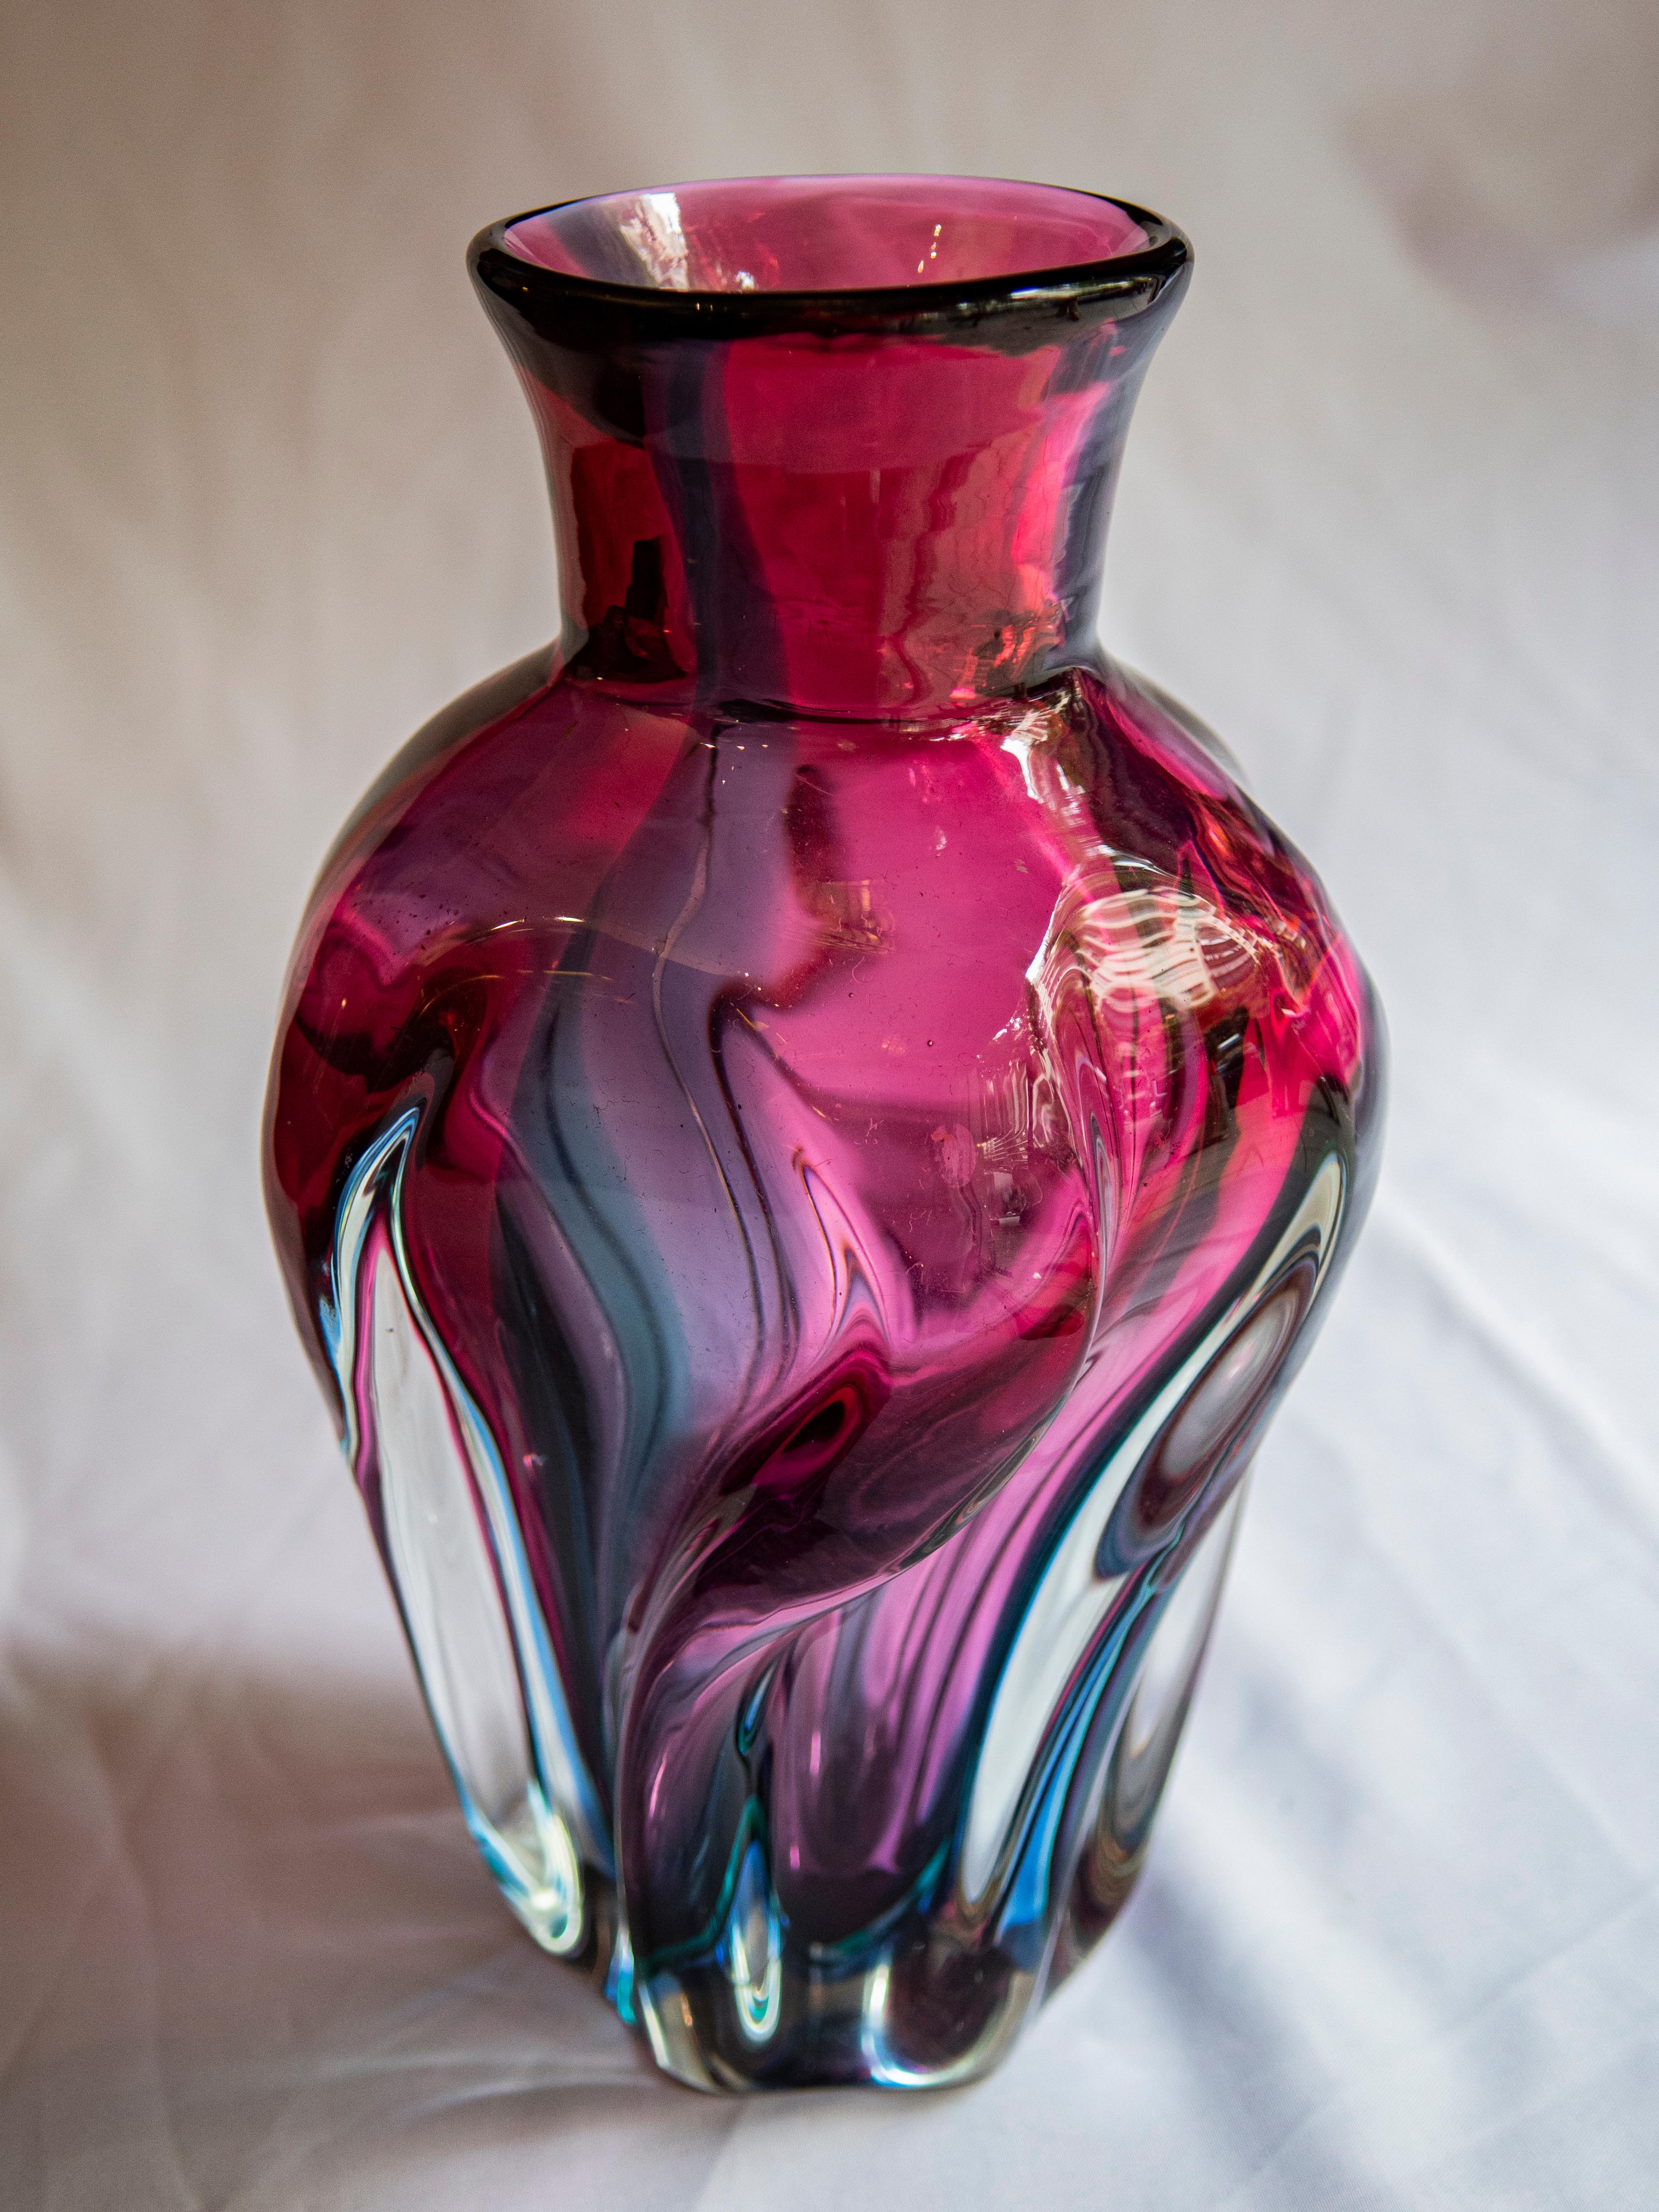 Immerse yourself in the swirling hues of a mid-century masterpiece: the Josef Hospodka Chribska glass vase. Its vibrant violet, pink, and blue colors dance in perfect harmony, a testament to Hospodka's artistry. Beyond its aesthetic allure, this